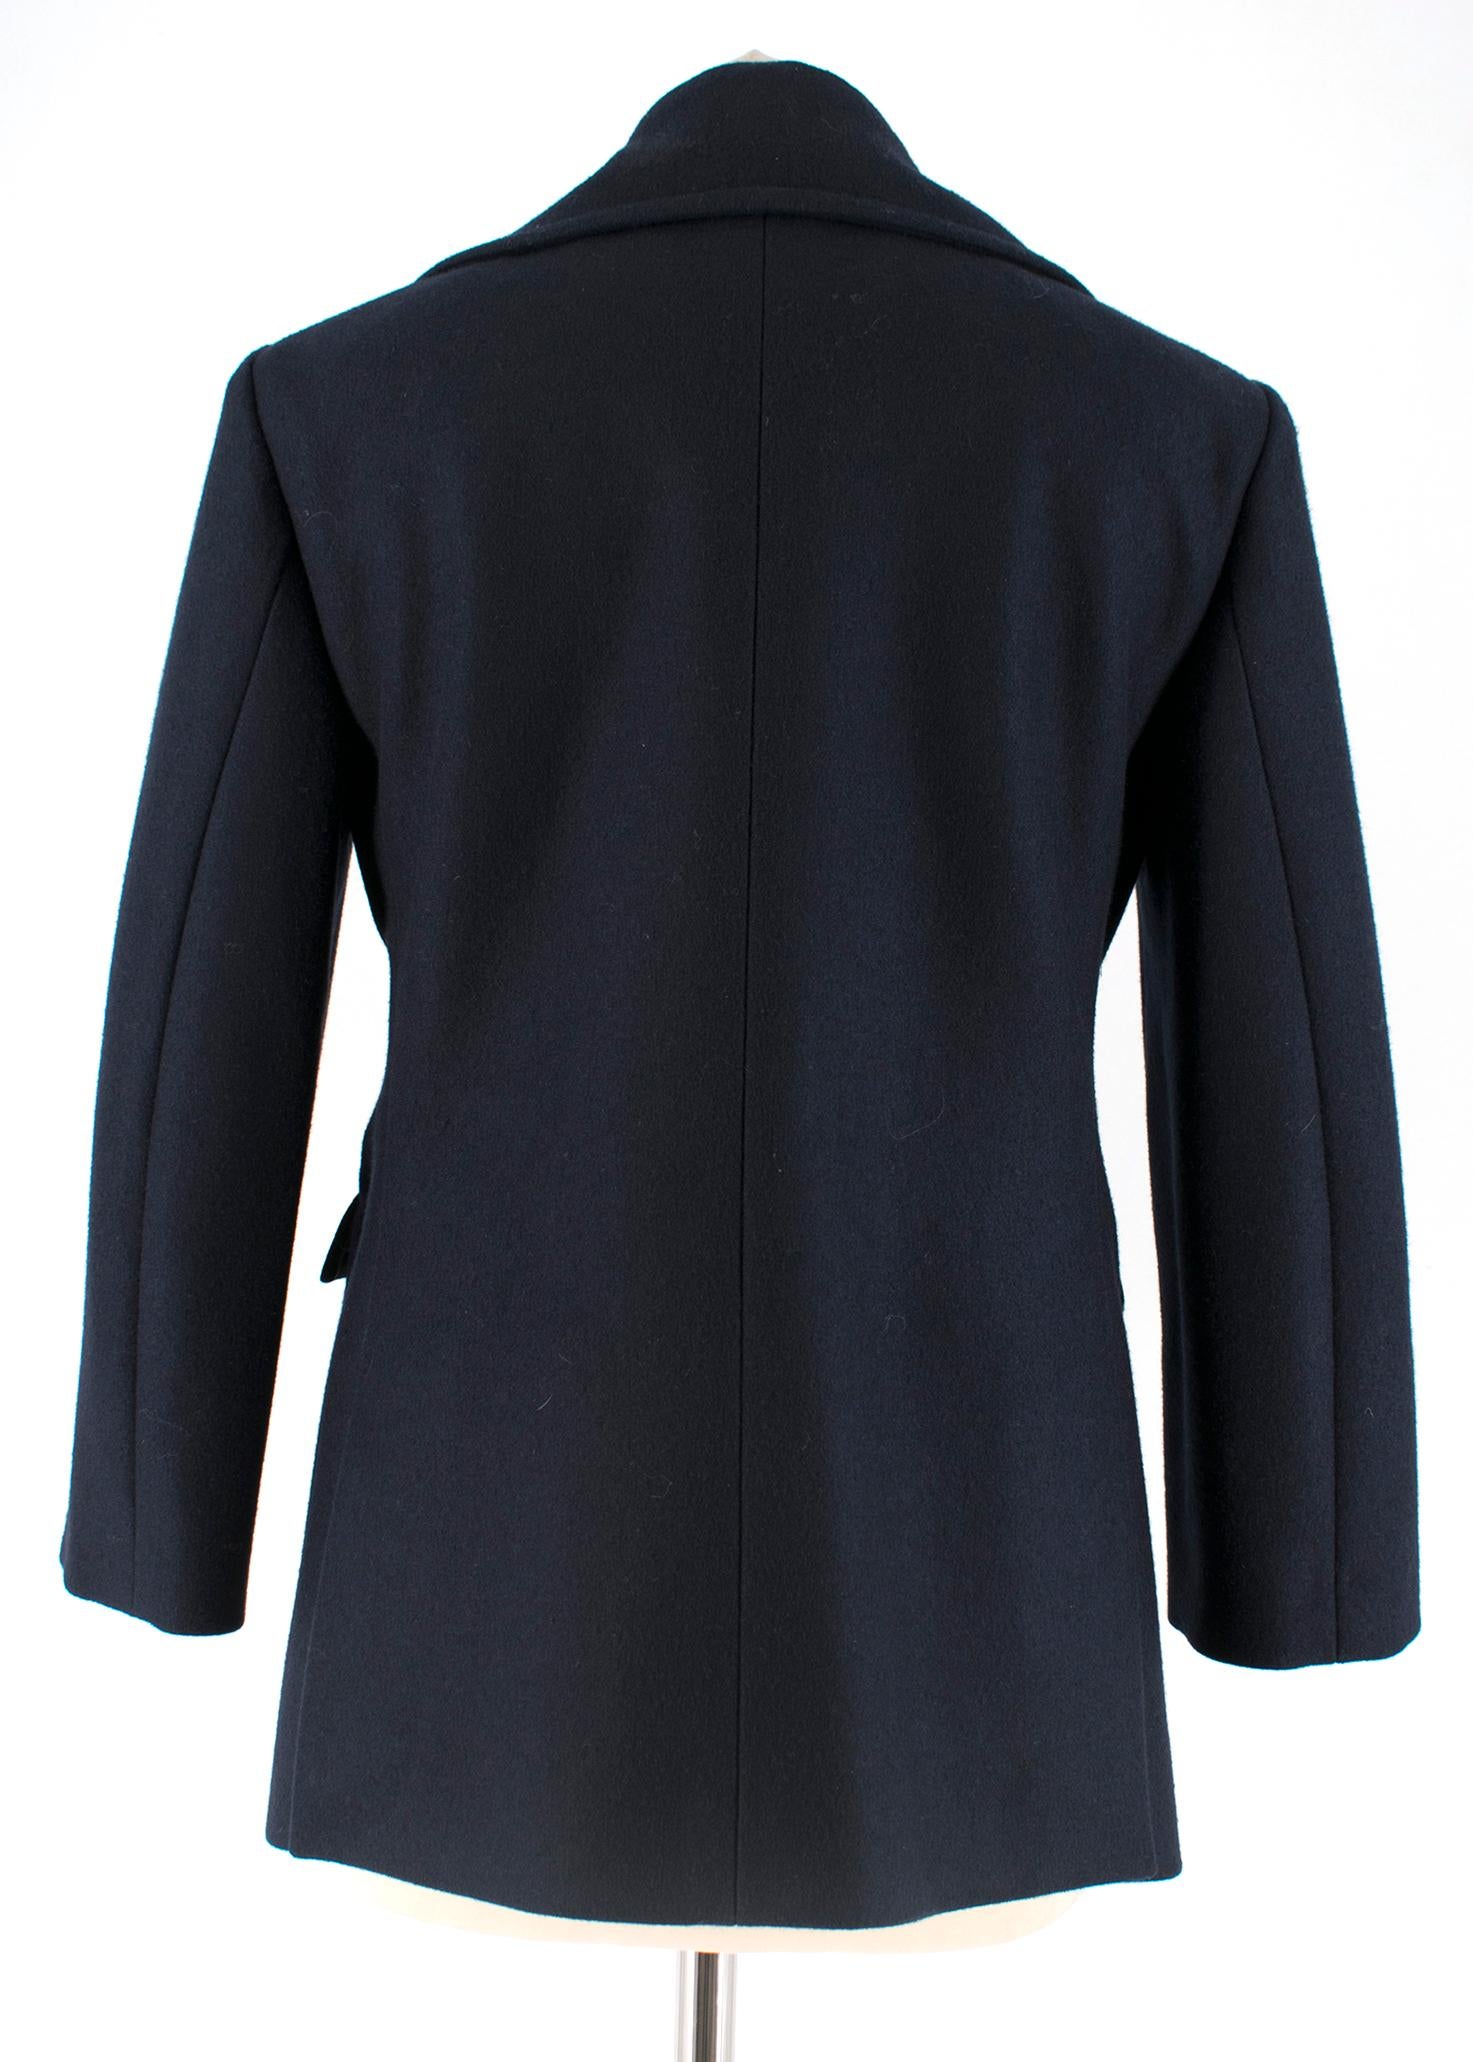 Black Celine Double Breasted Wool Navy Coat SIZE S